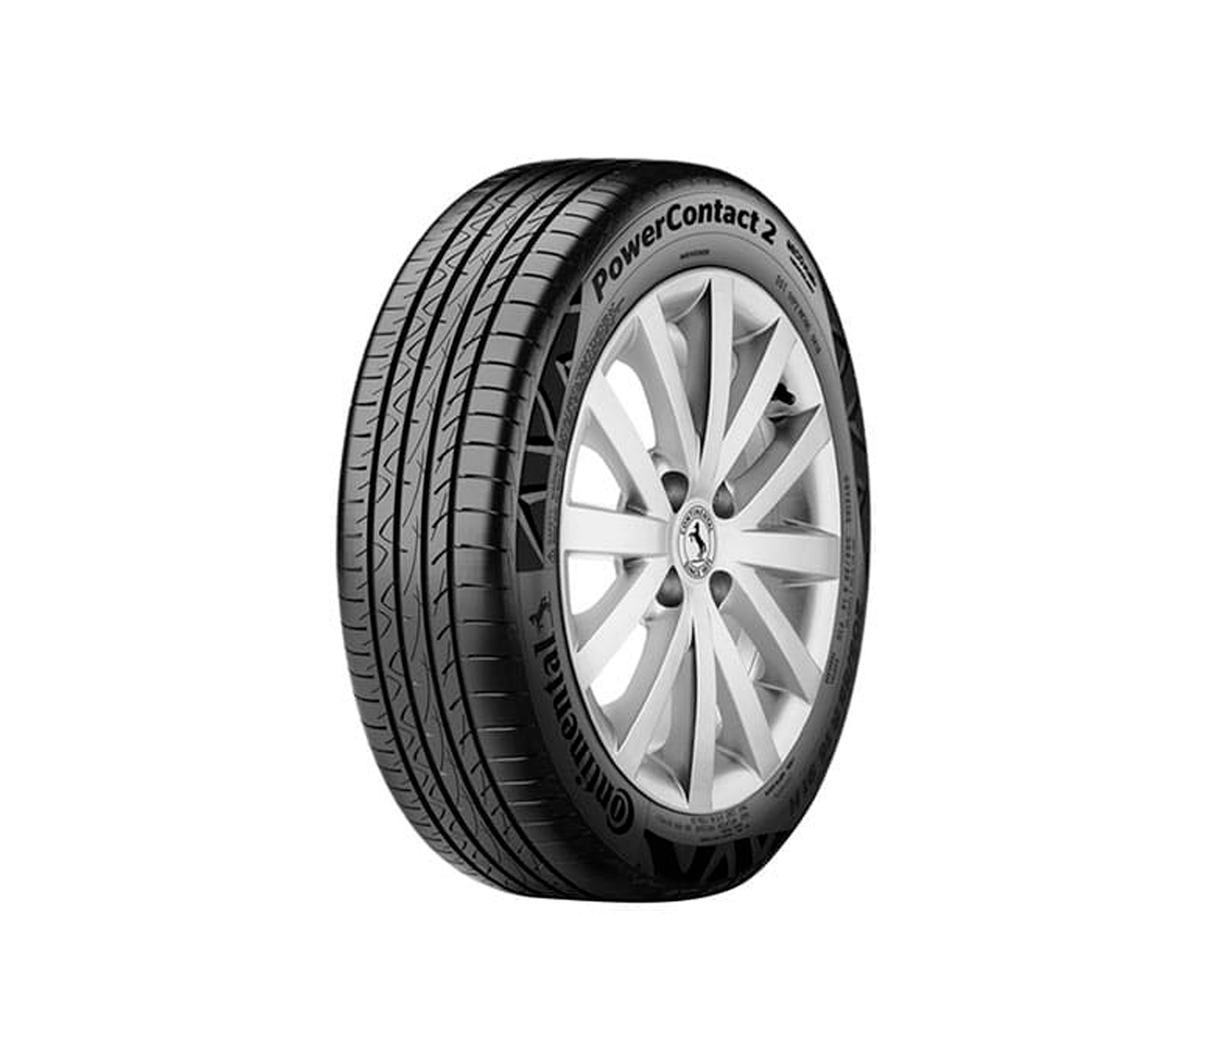 Neumático 175/70r14 84t PowerContact2 Continental